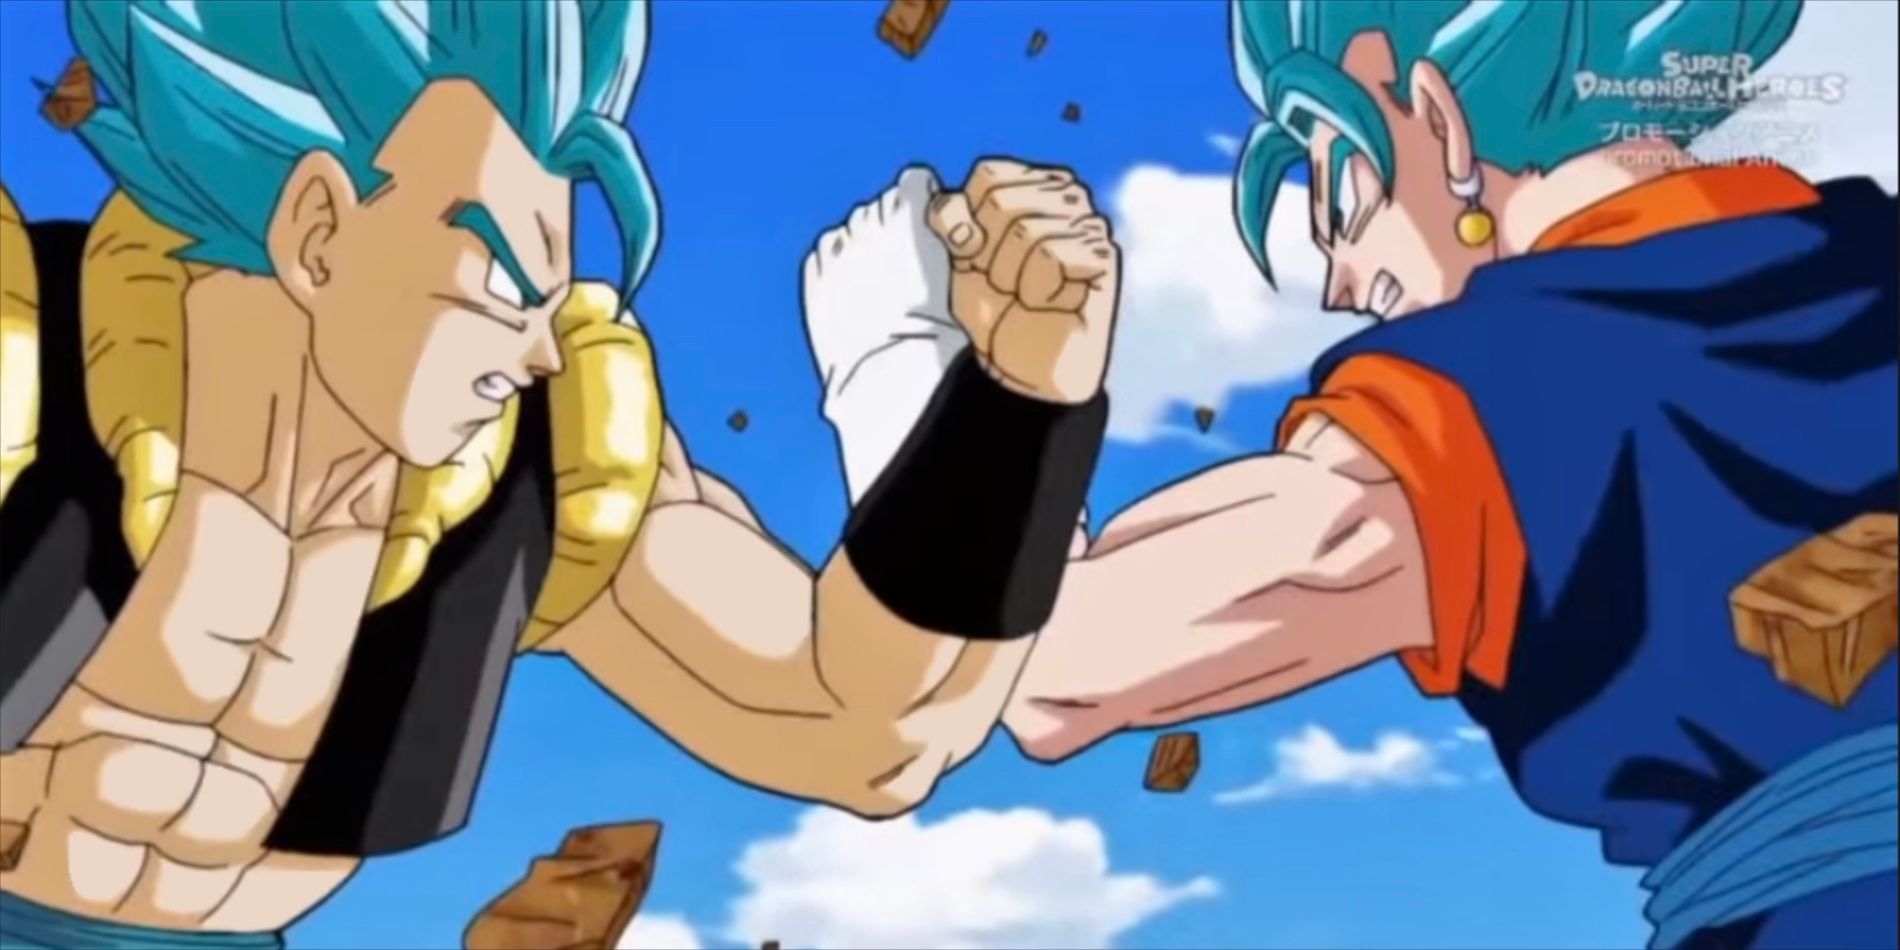 10 Fights We Want to See in Super Dragon Ball Heroes that Aren't Possible in Canon Stories